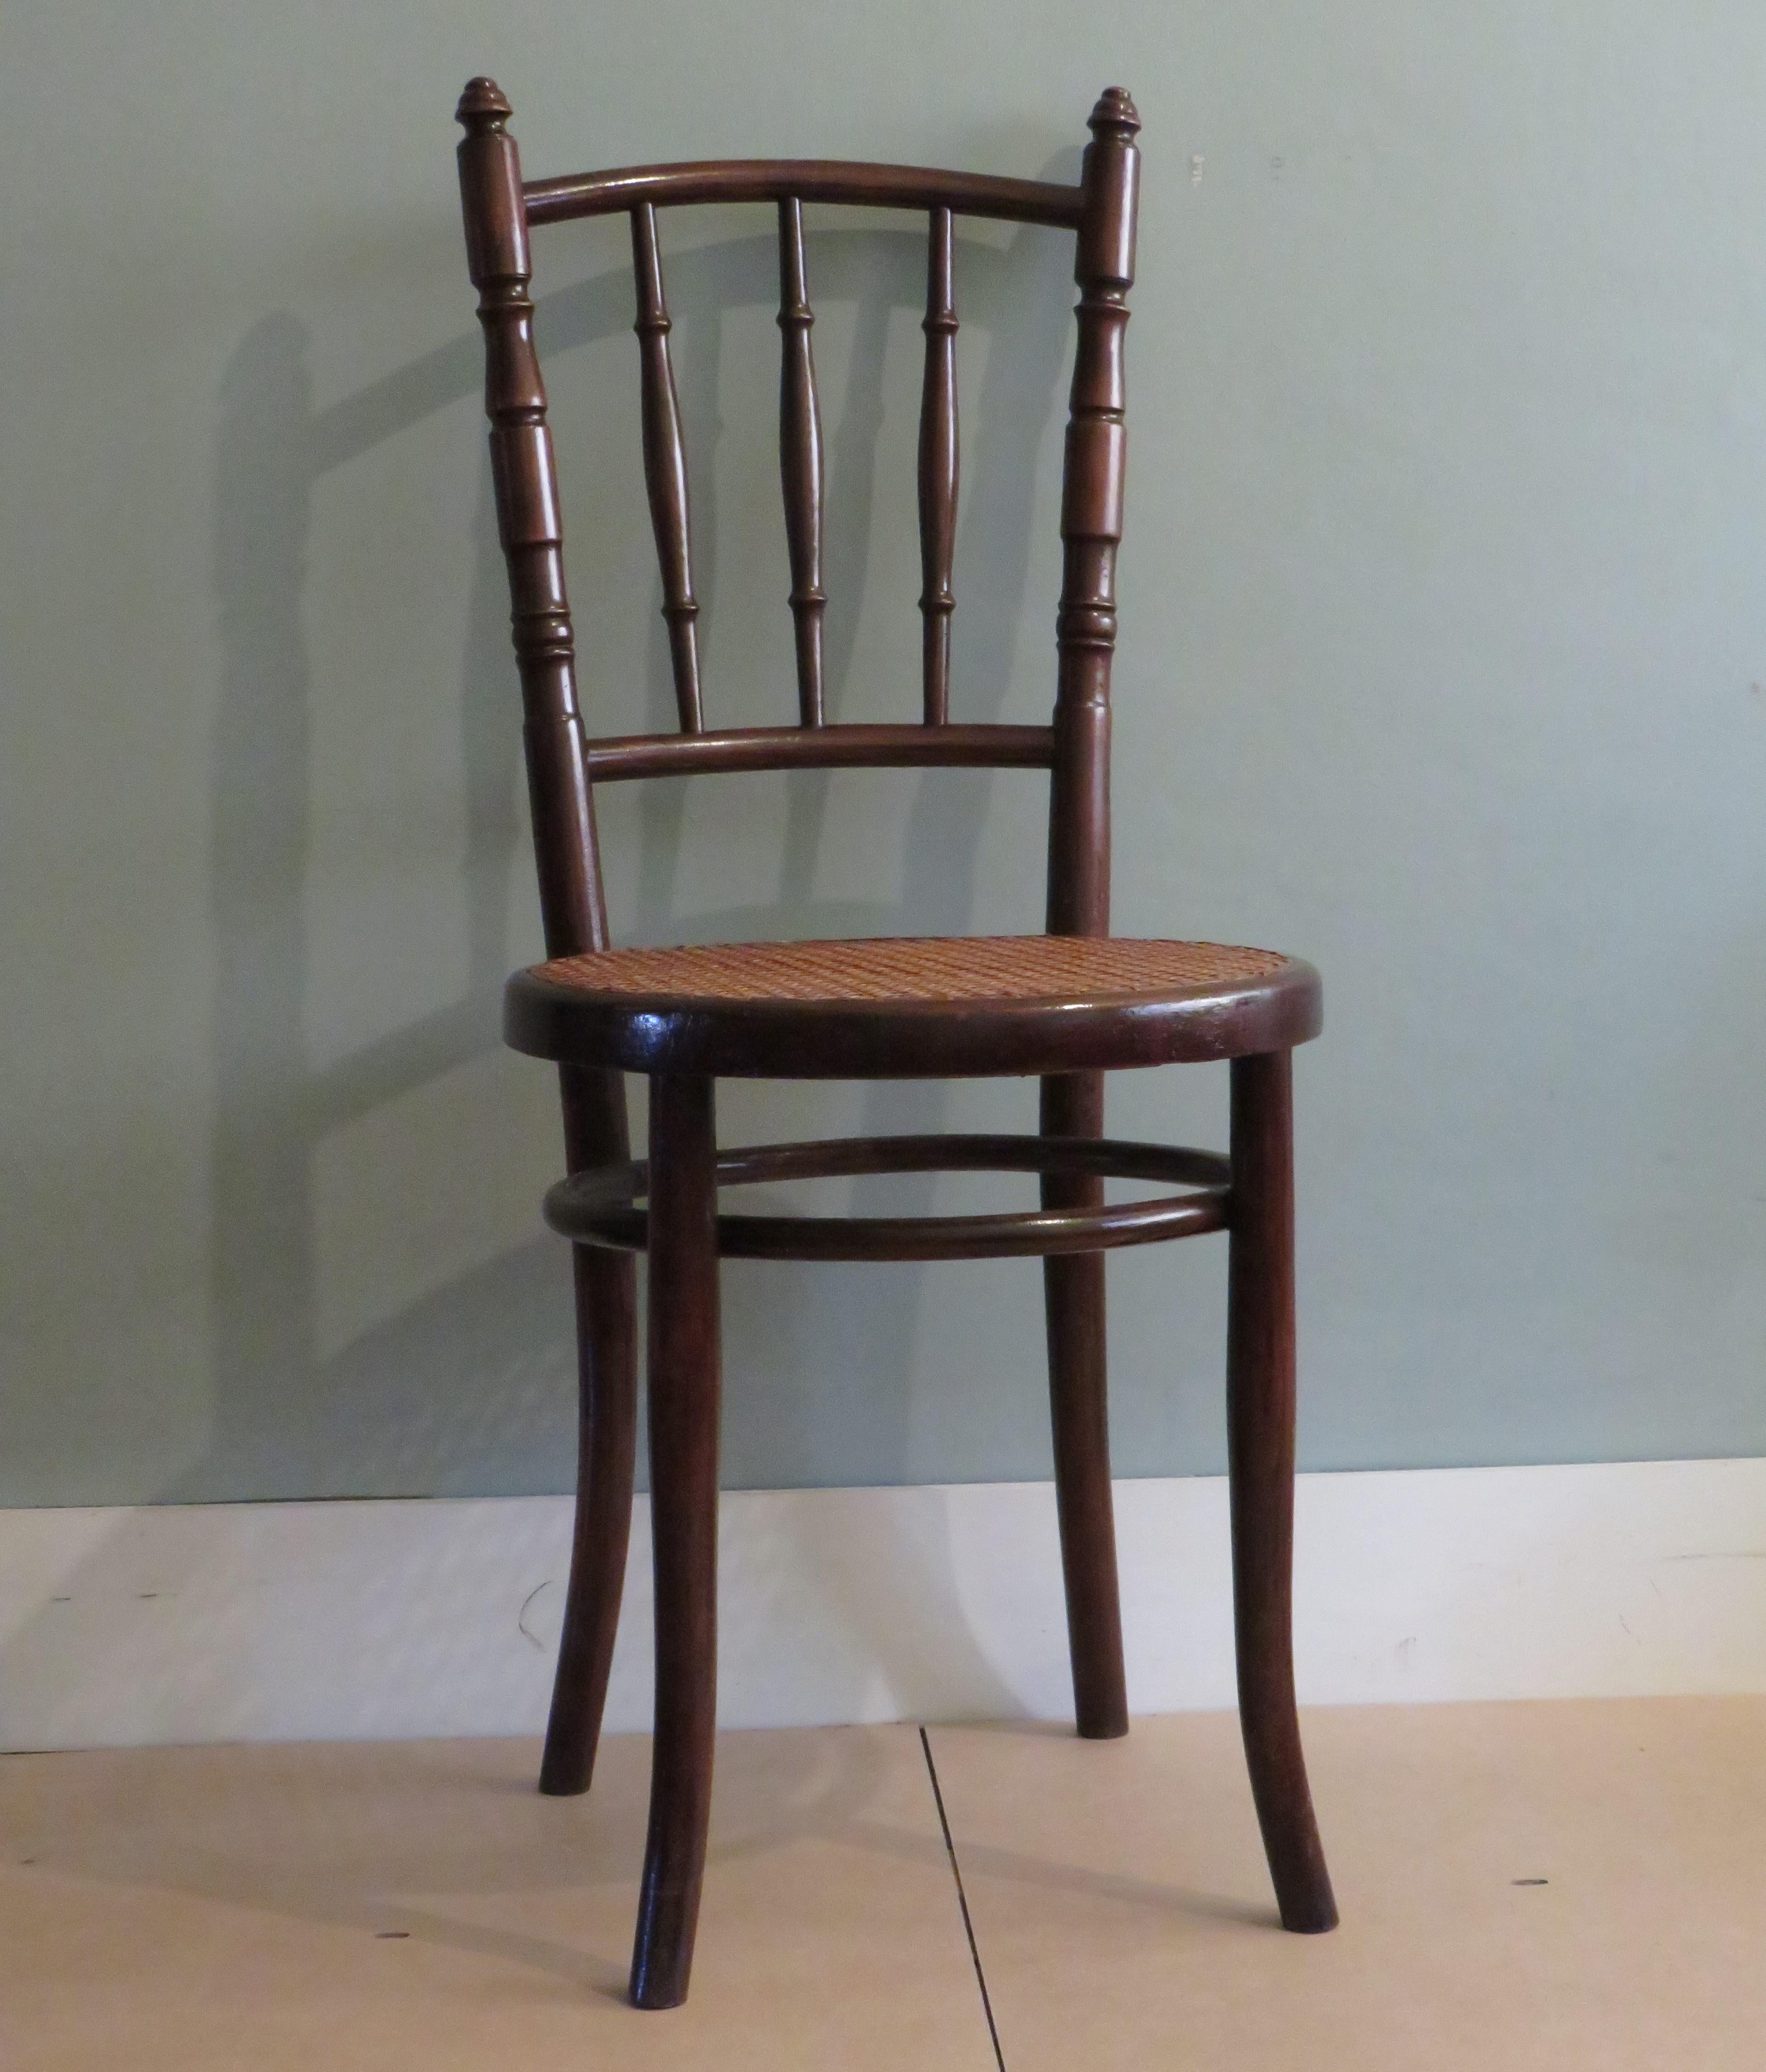 Bentwood chair by Mundus, early 20th century Austria
Manufactured by Mundus under license of Thonet.
This bentwood chair has a hand-woven webbing seat and is in very good condition.
There is a factory stamp present.
Dimensions: H 93, W 41 and D